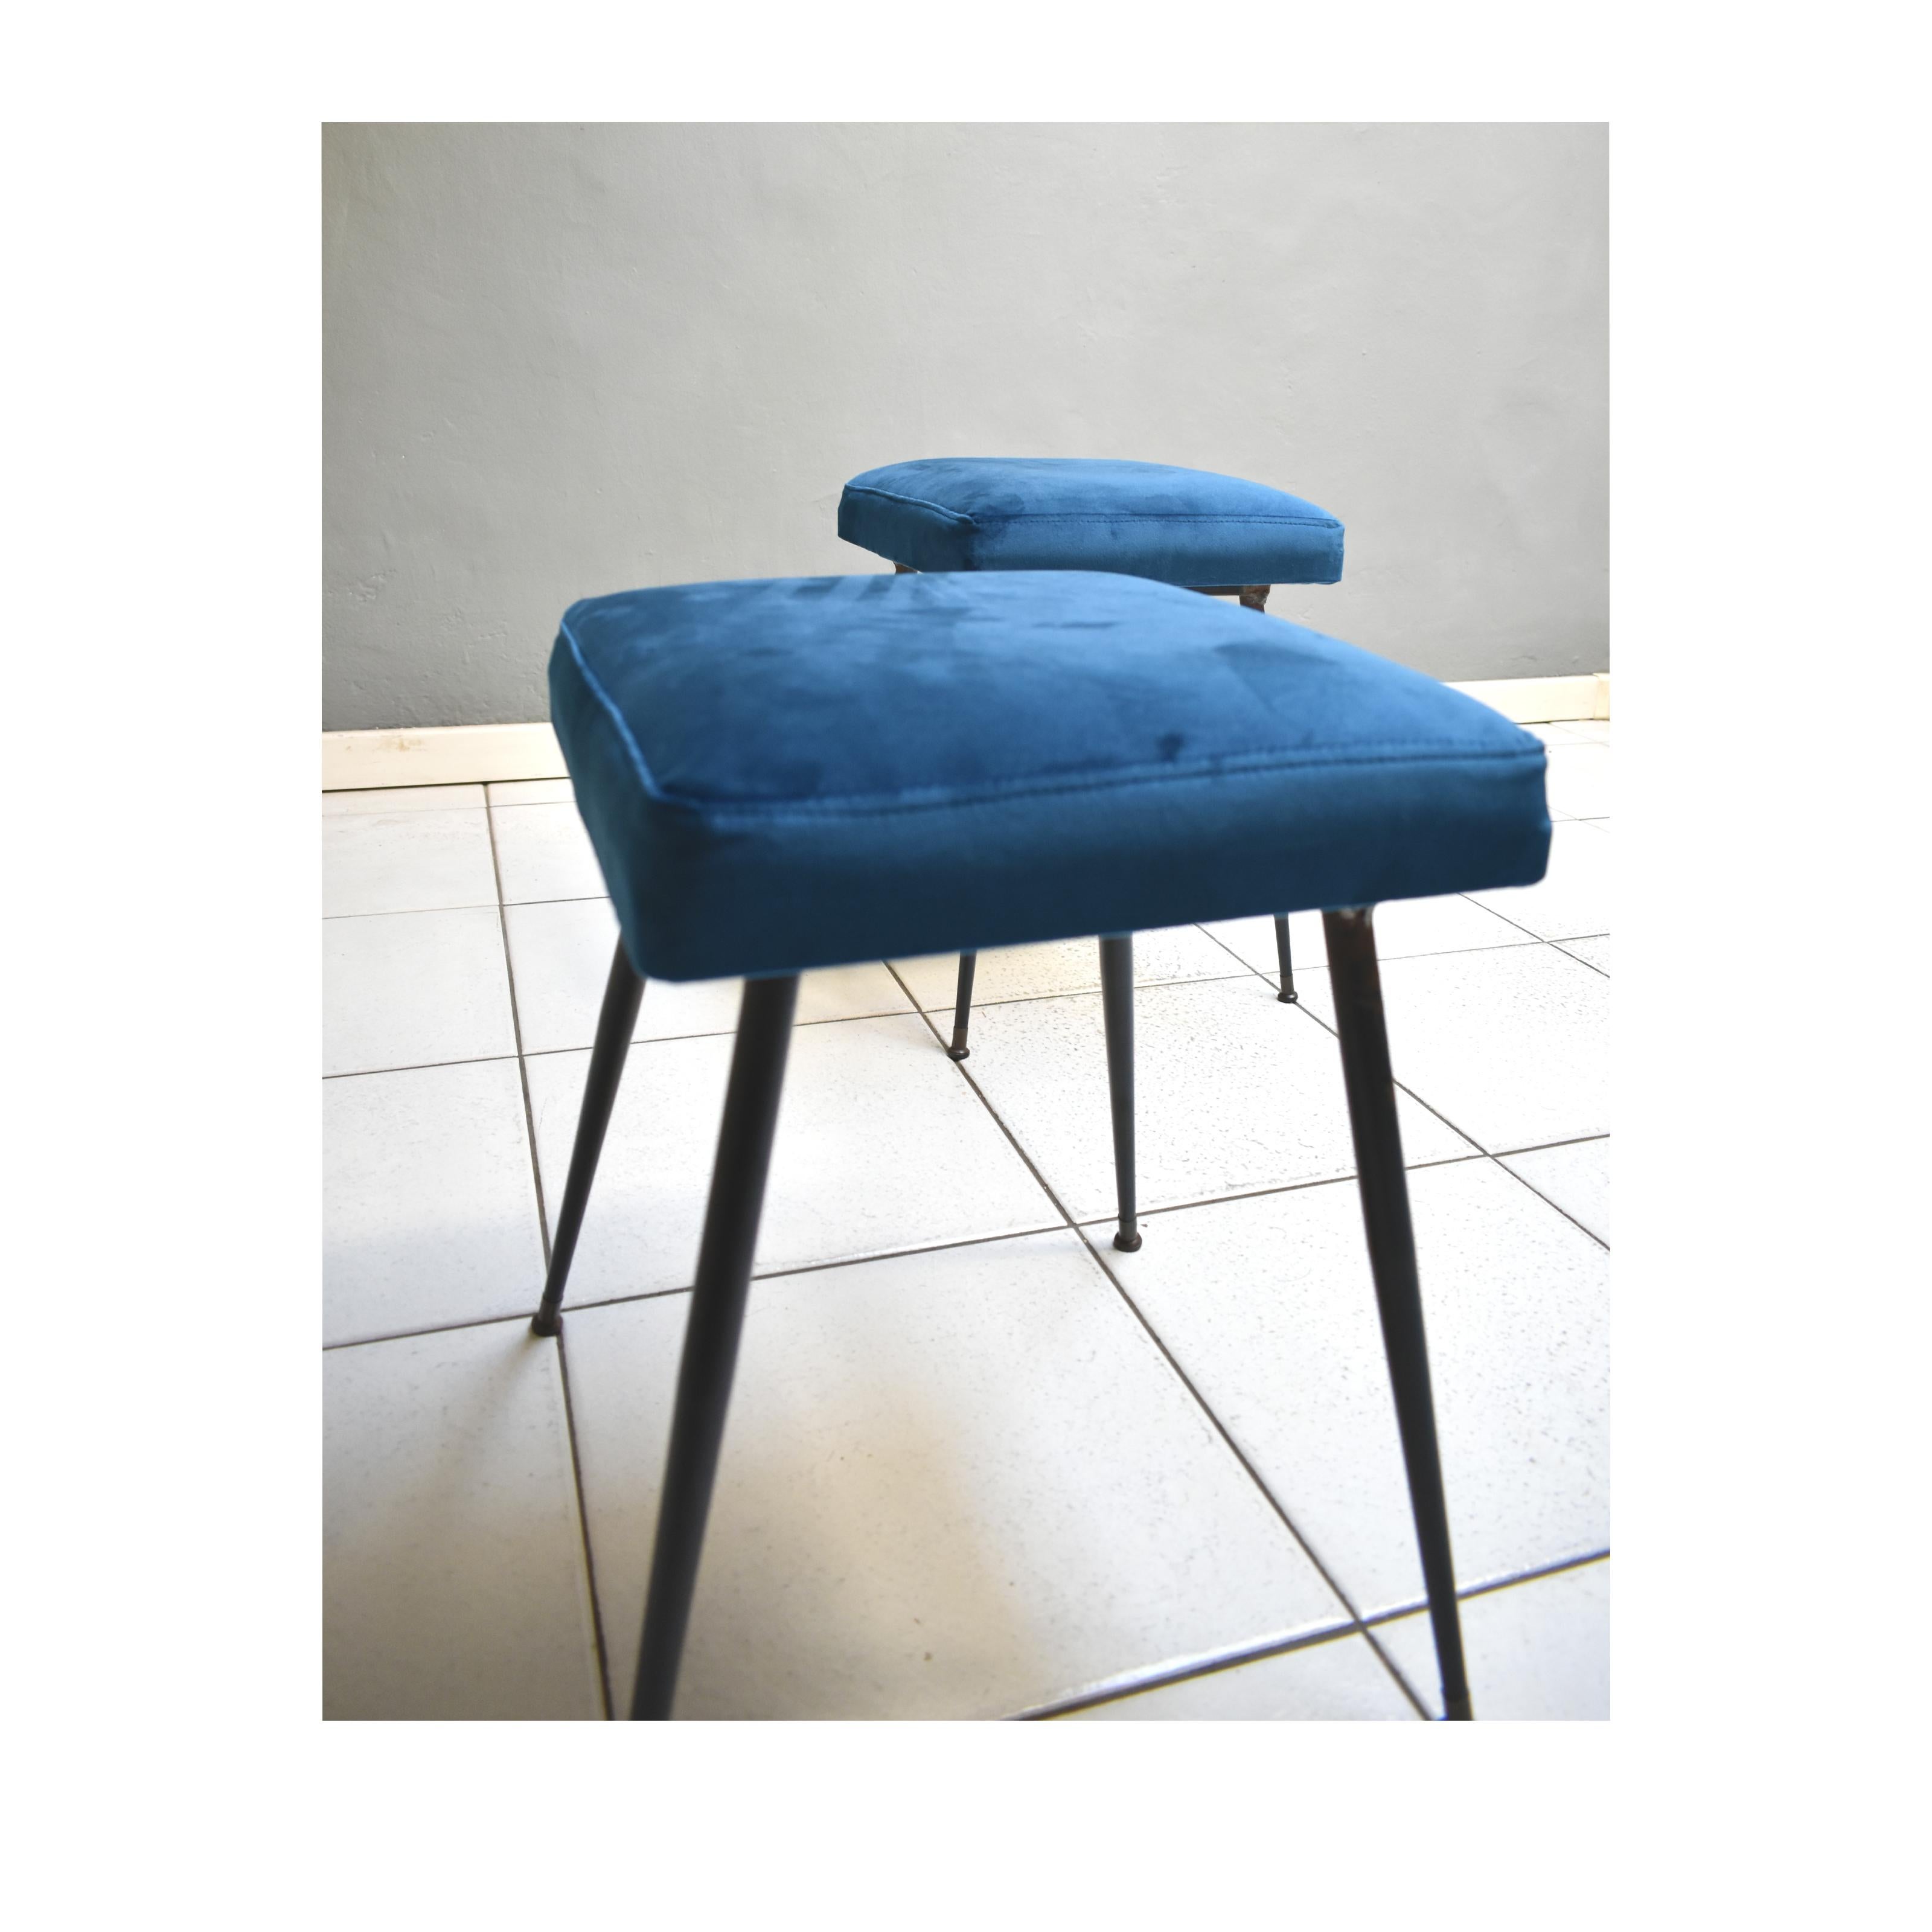 Mid-20th Century Set of Two Poufs 60s Stools, Brass Feet and Petroleum Blue Velvet Upholstery For Sale